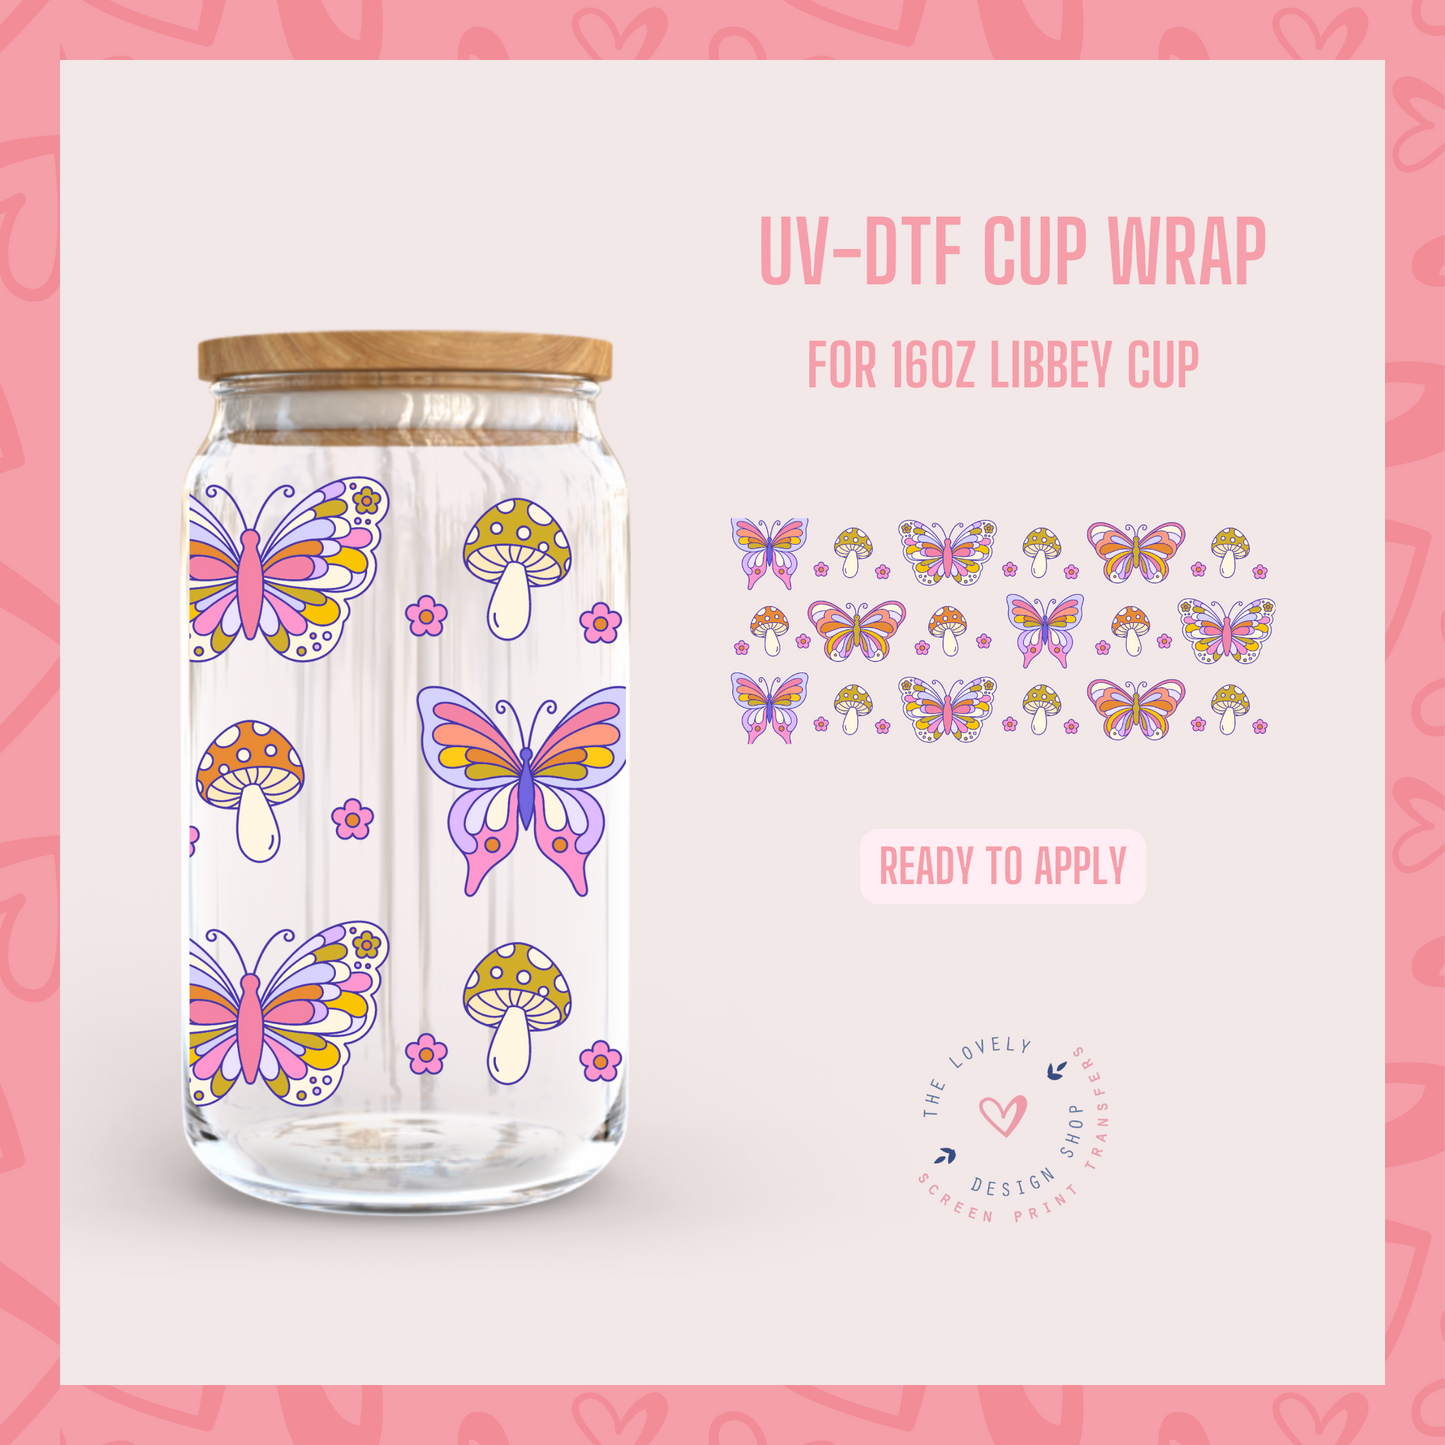 Butterfly Mushies - UV DTF 16 oz Libbey Cup Wrap (Ready to Ship) Mar 11